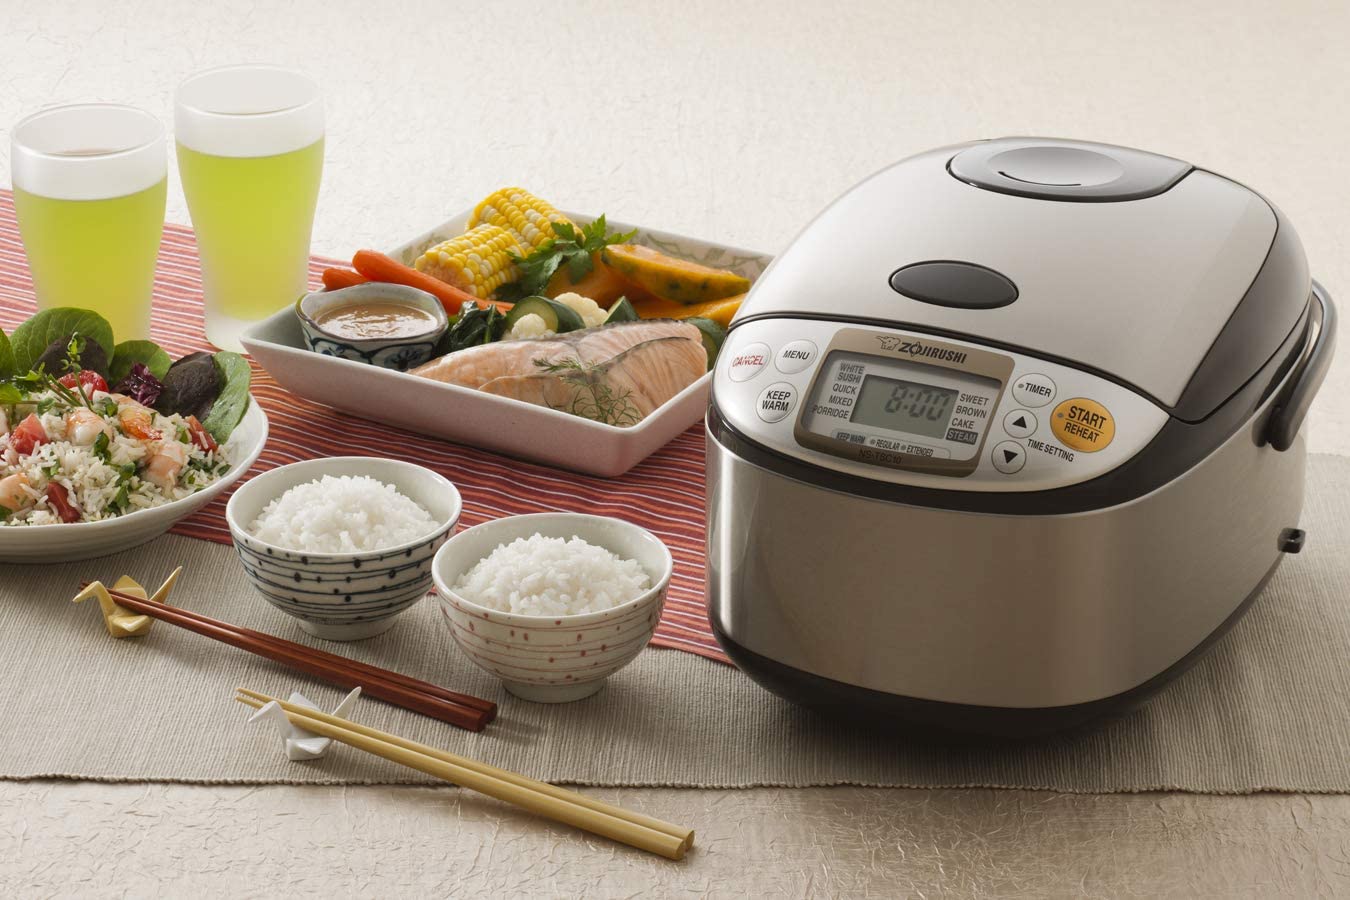 Zojirushi Micom Rice Cooker and Warmer, 5.5 Cup (Uncooked)